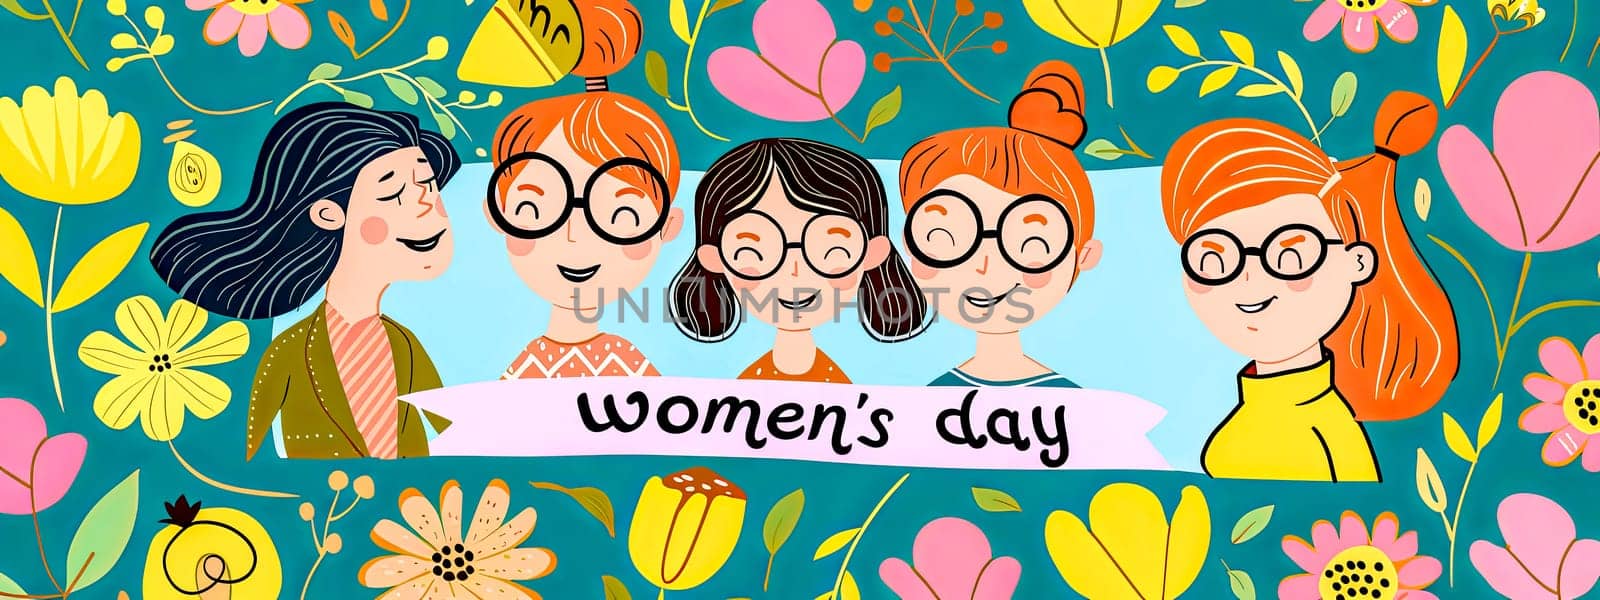 Cheerful women's day illustration with diverse female characters by Edophoto